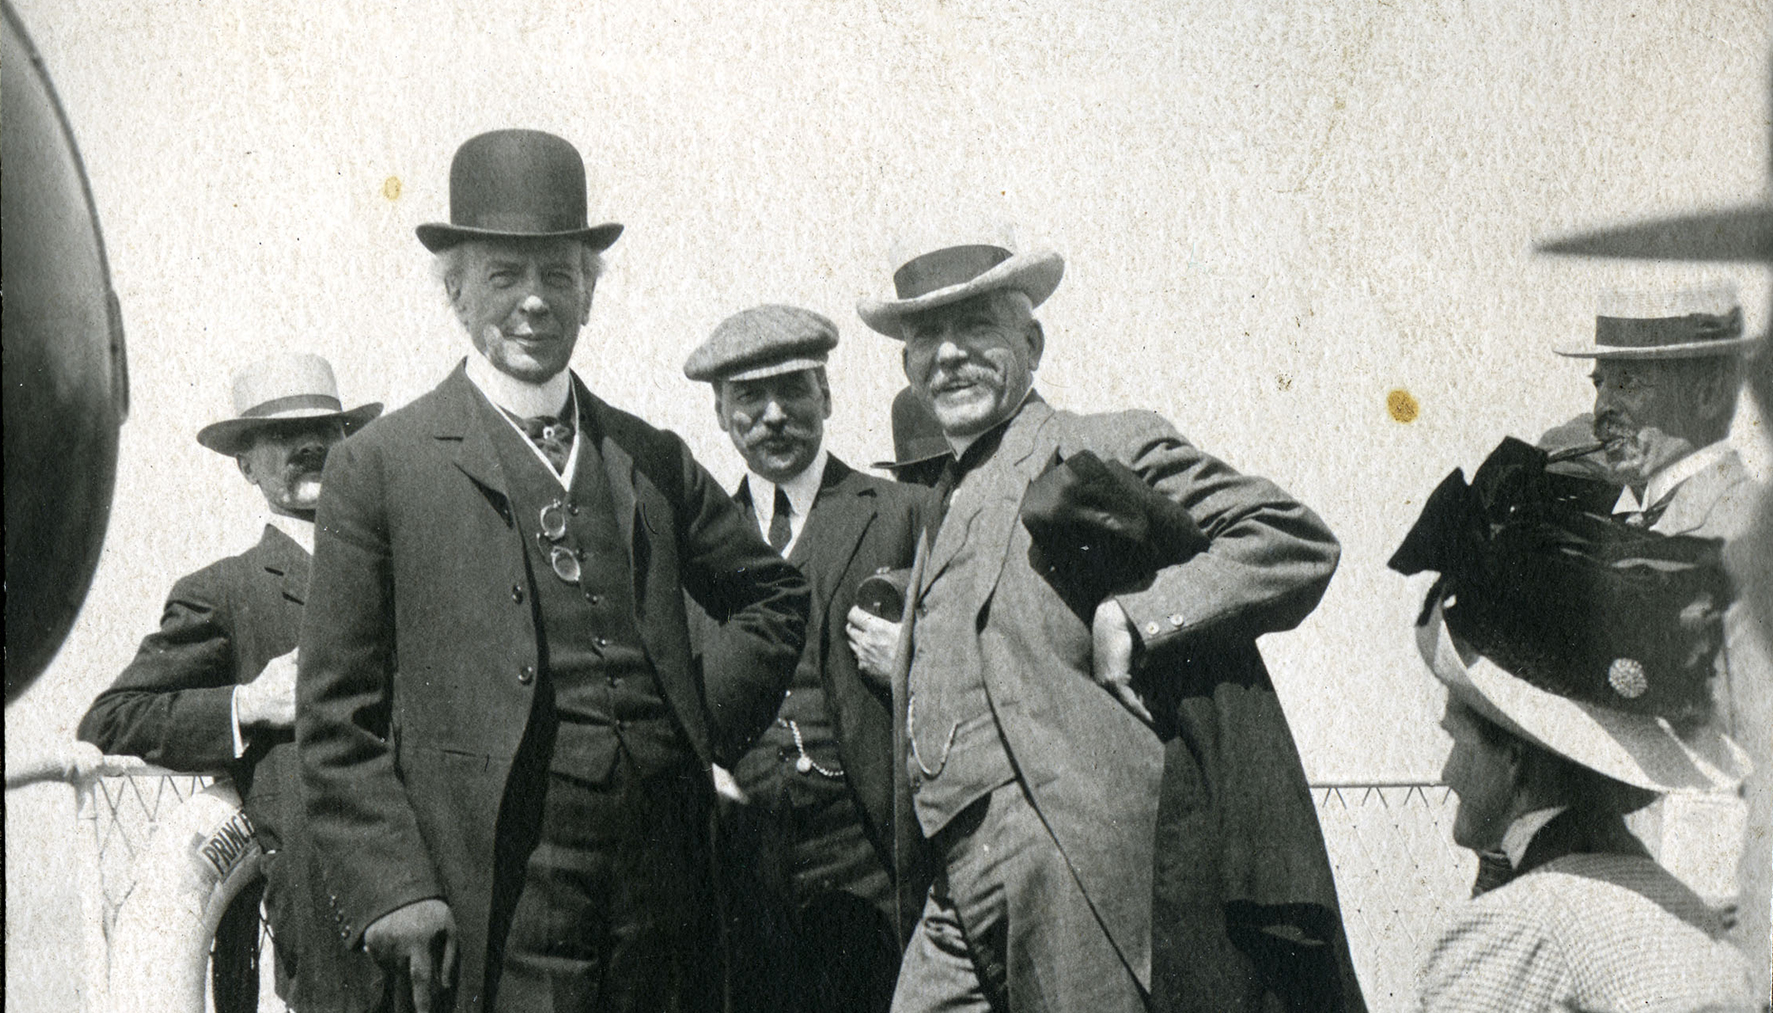 Prime Minister Sir Wilfrid Laurier and colleagues on board a Grand Trunk Pacific steamship, ca. 1910